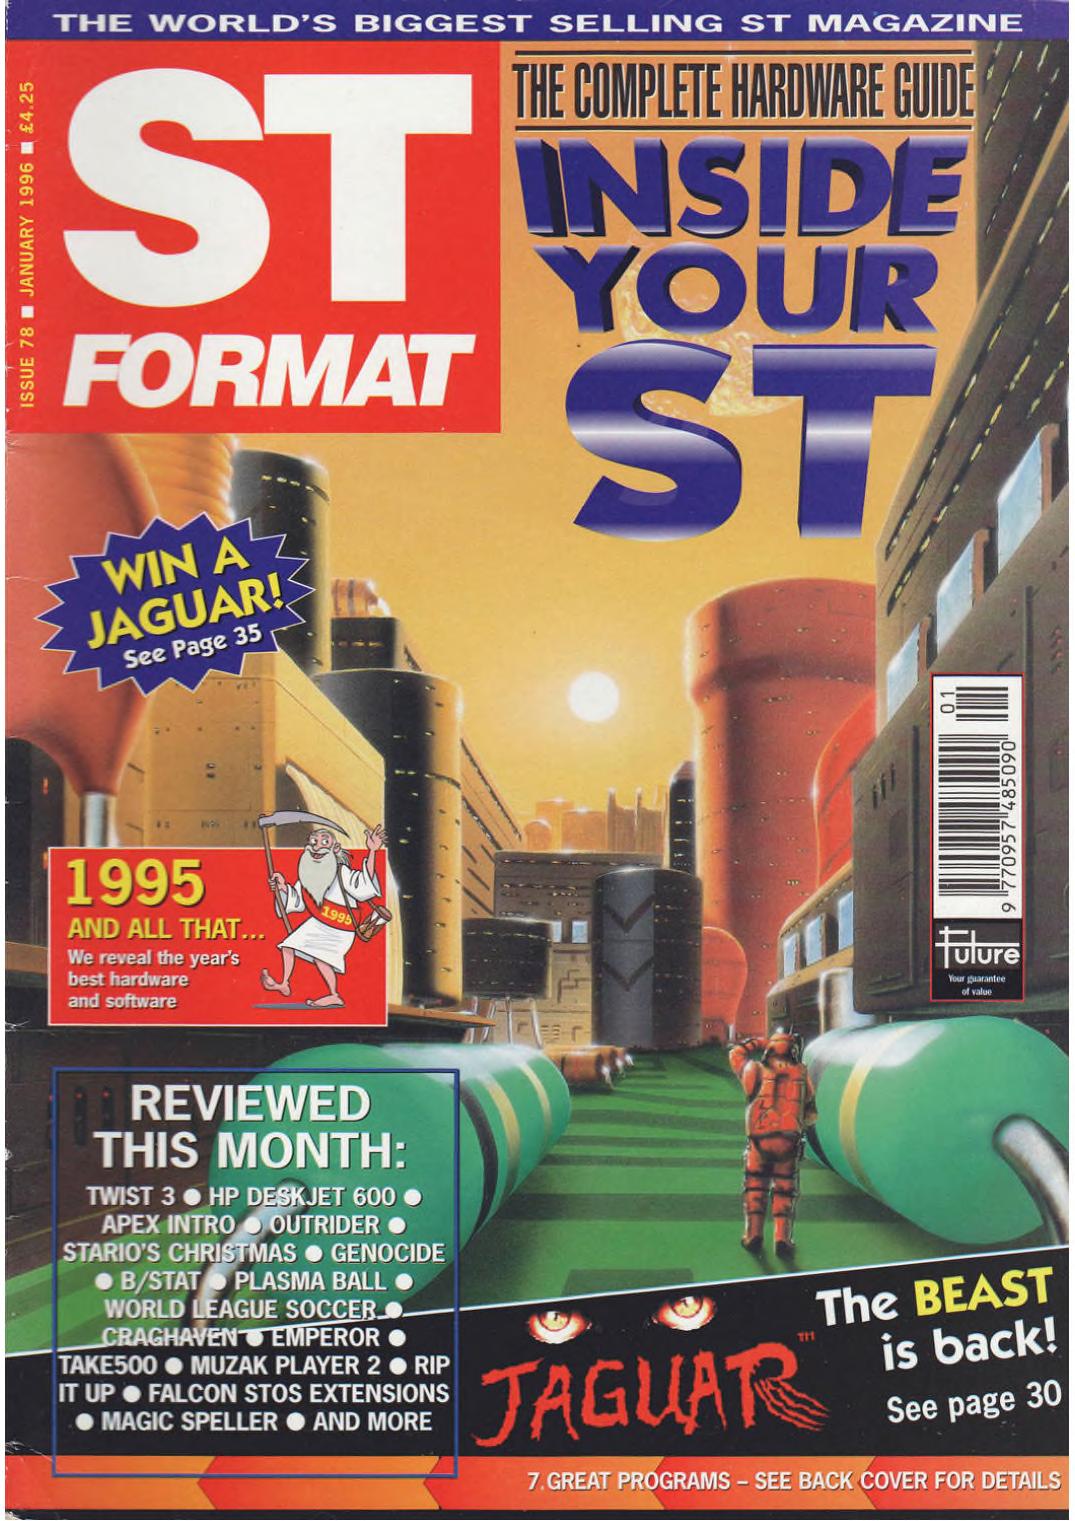 Cover for ST Format 78 (Jan 1996)